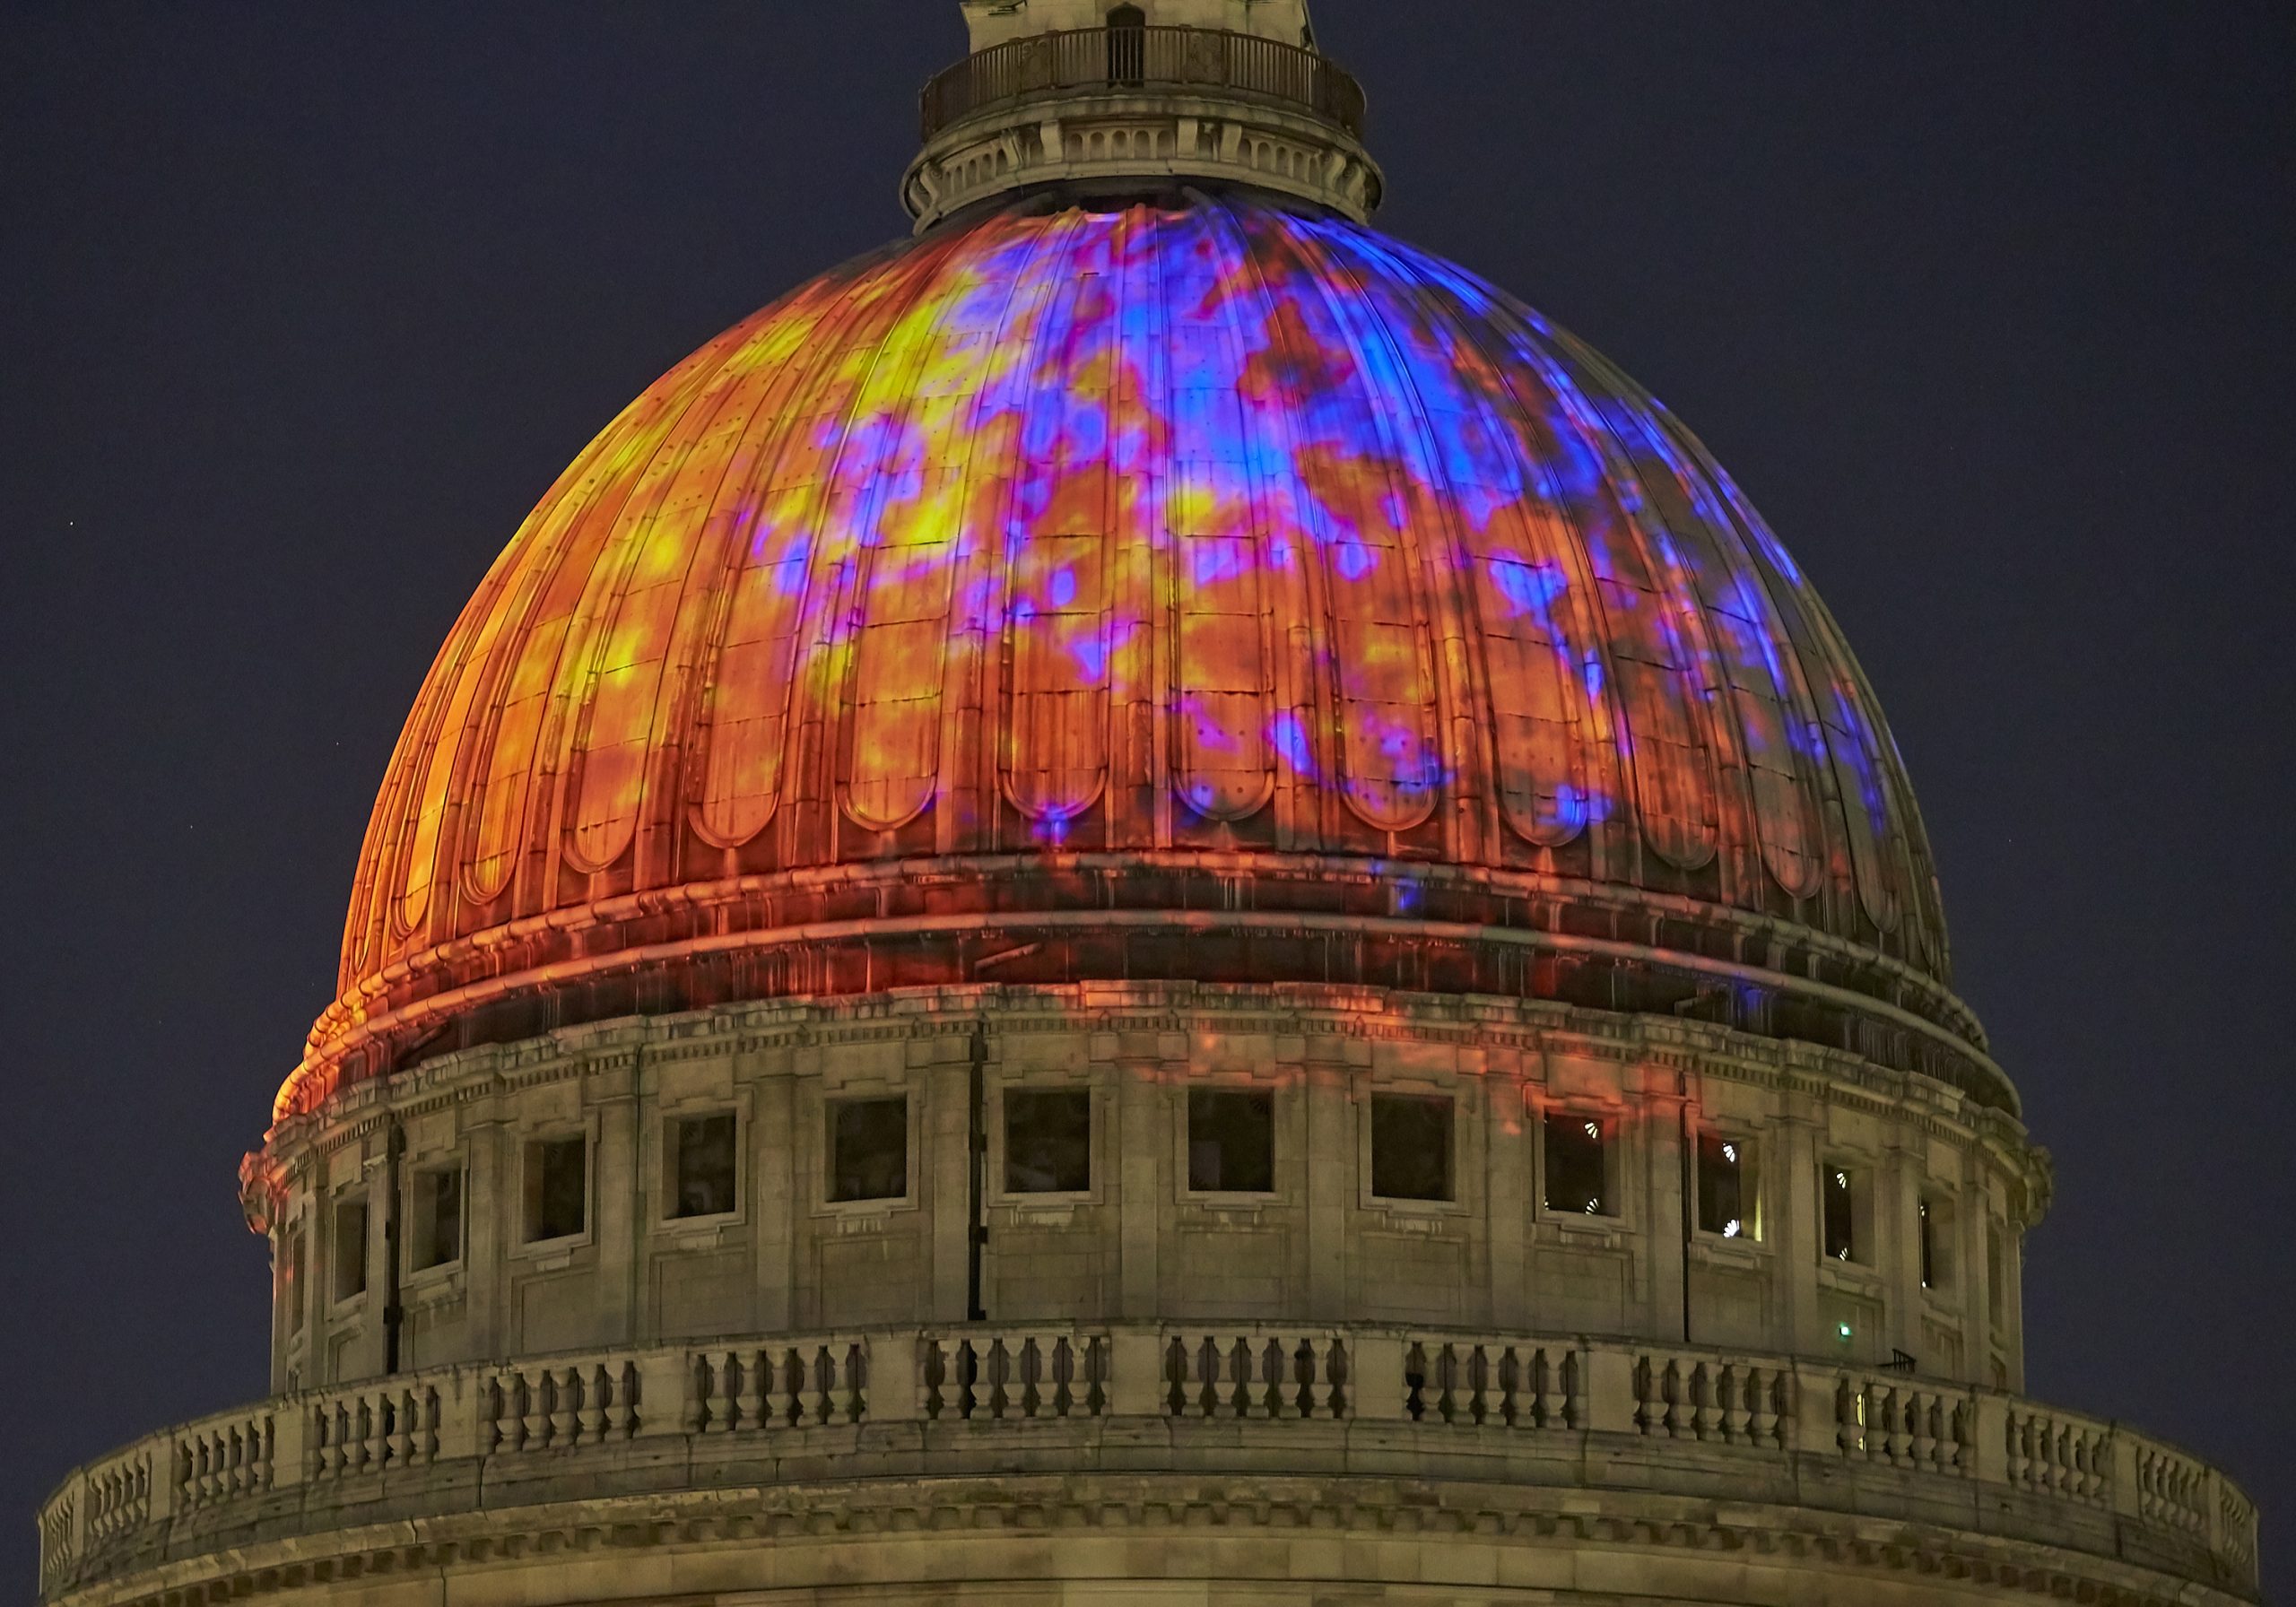 Test projection of Fires of London: orange, yellow and purple squares of light projected onto the dome of St Paul's Cathedral